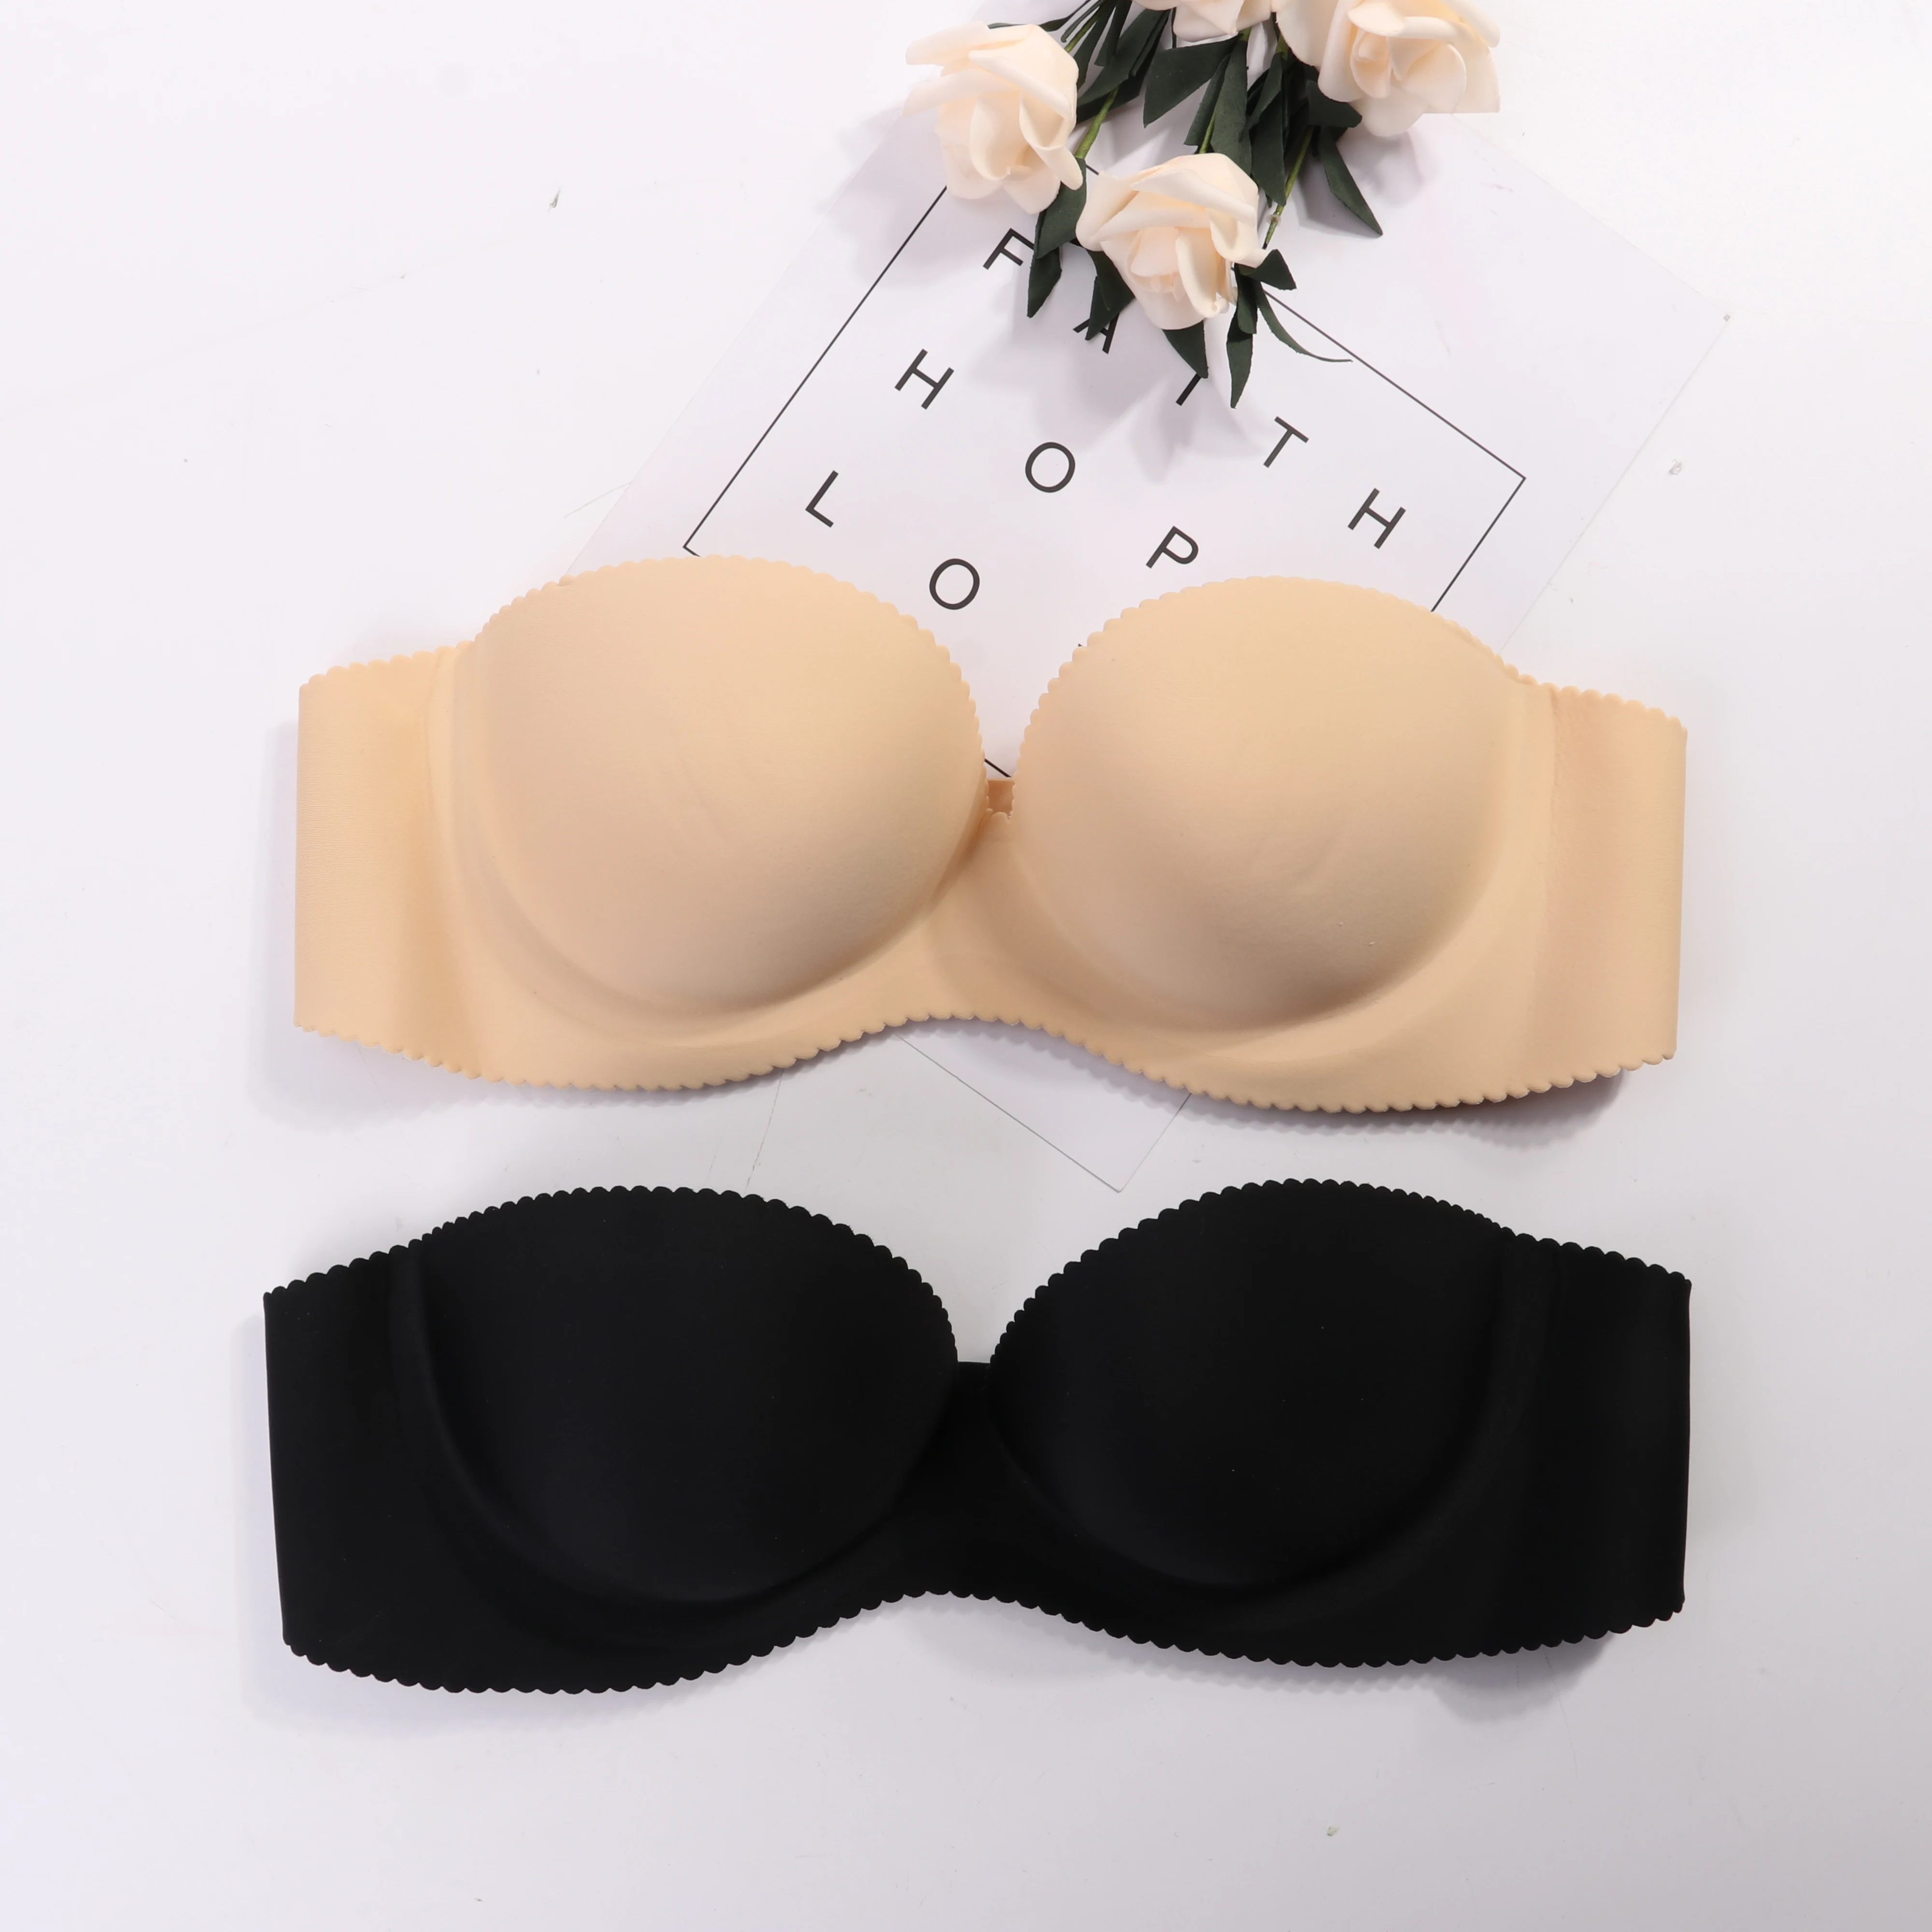 Niris Lingerie Dropshipping Underwear accessory Push Up Backless Nipple Cover Adhesive silicon bra Nude Boob Tape